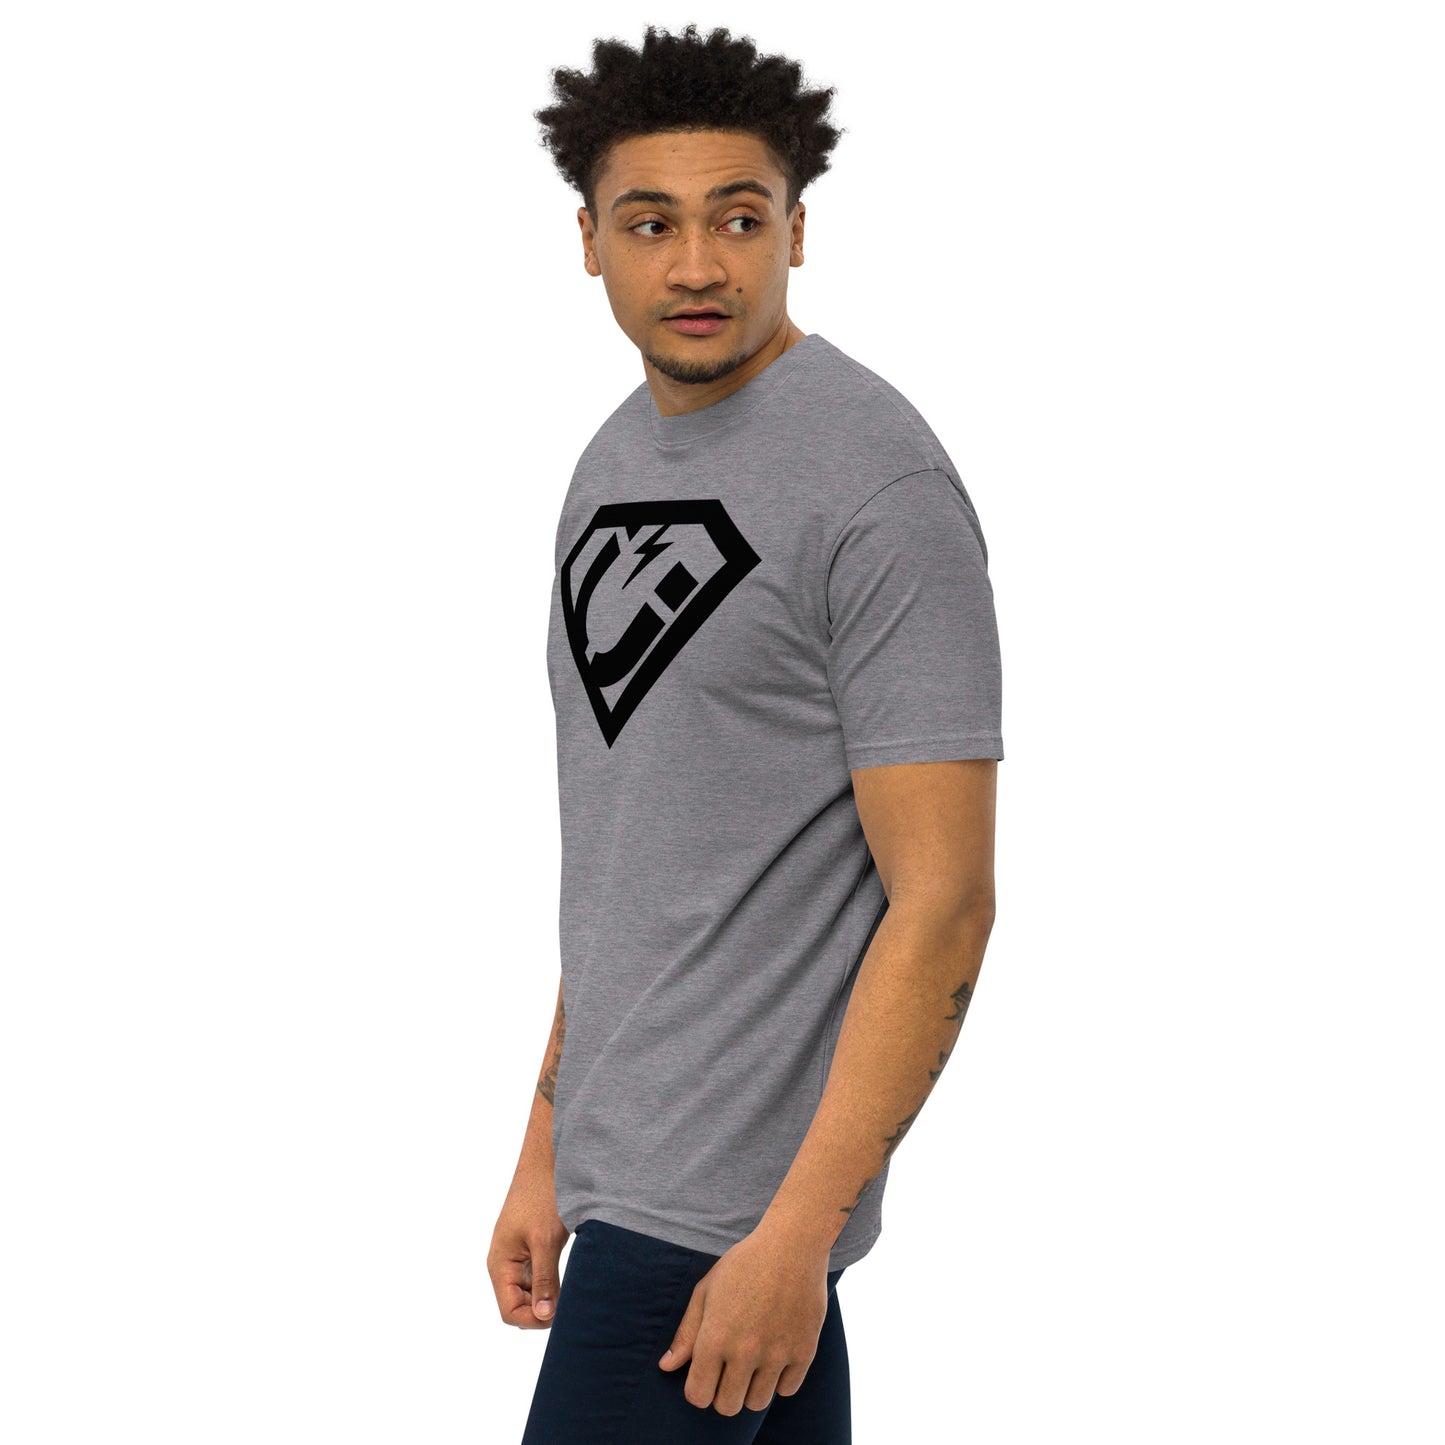 Super Attraction Marketer T-Shirt (classic)